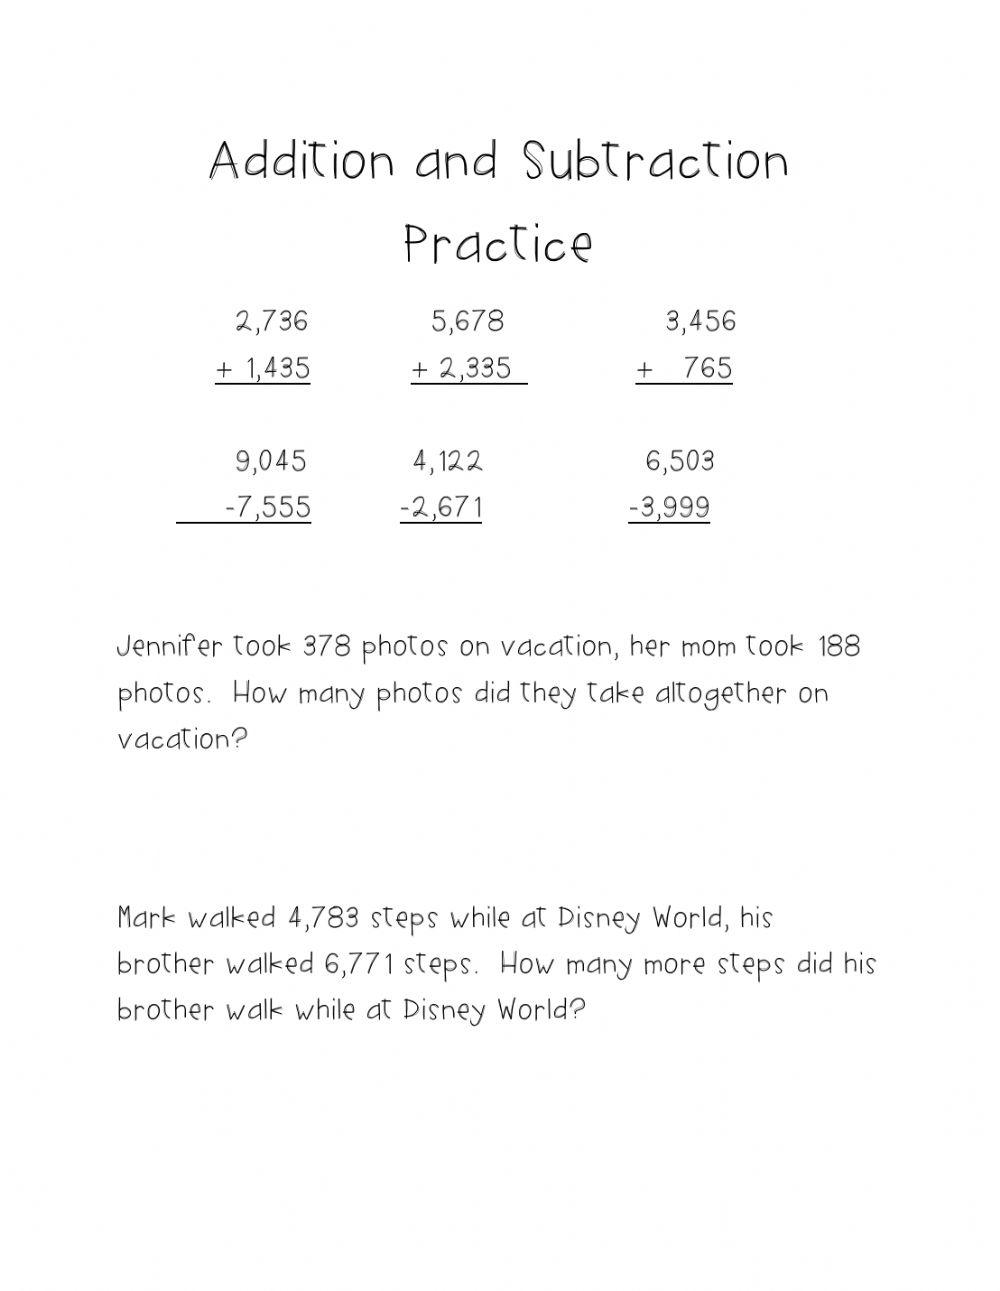 Addition and subtraction practice